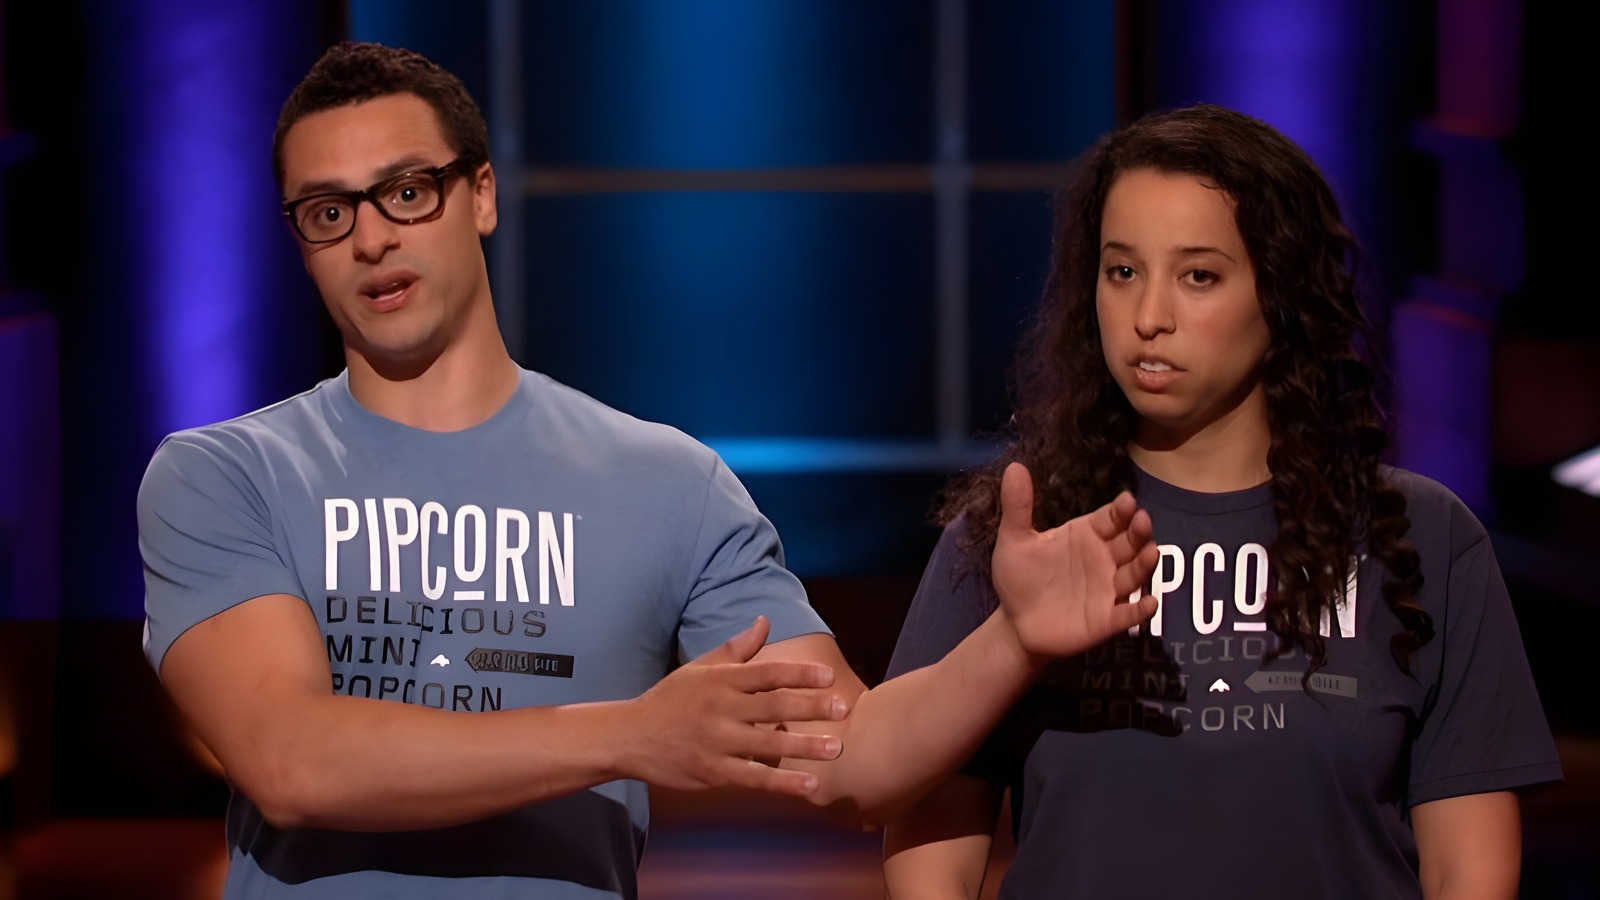 Whatever Happened To Pipcorn After Shark Tank?